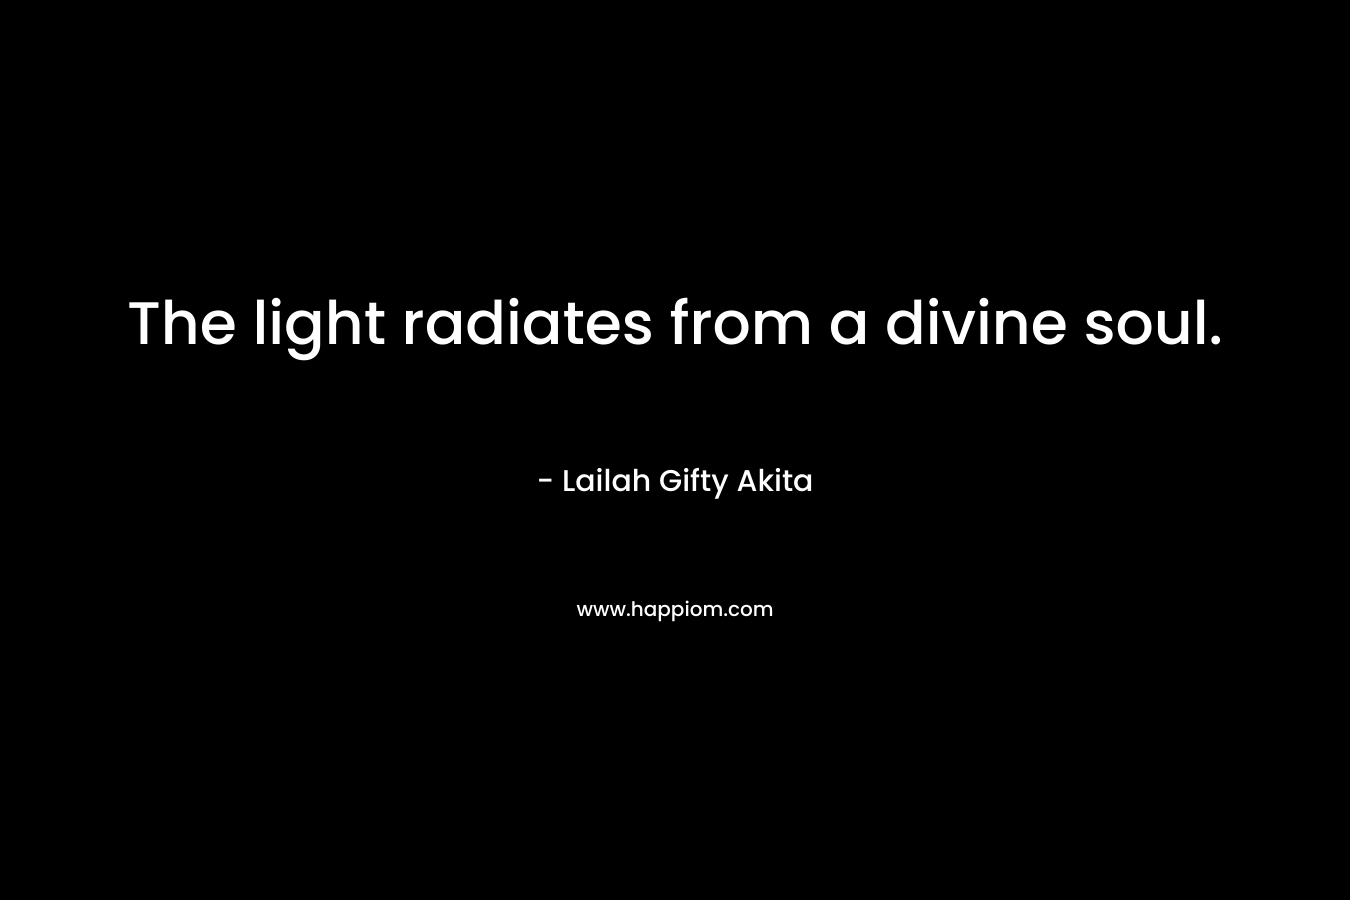 The light radiates from a divine soul. – Lailah Gifty Akita